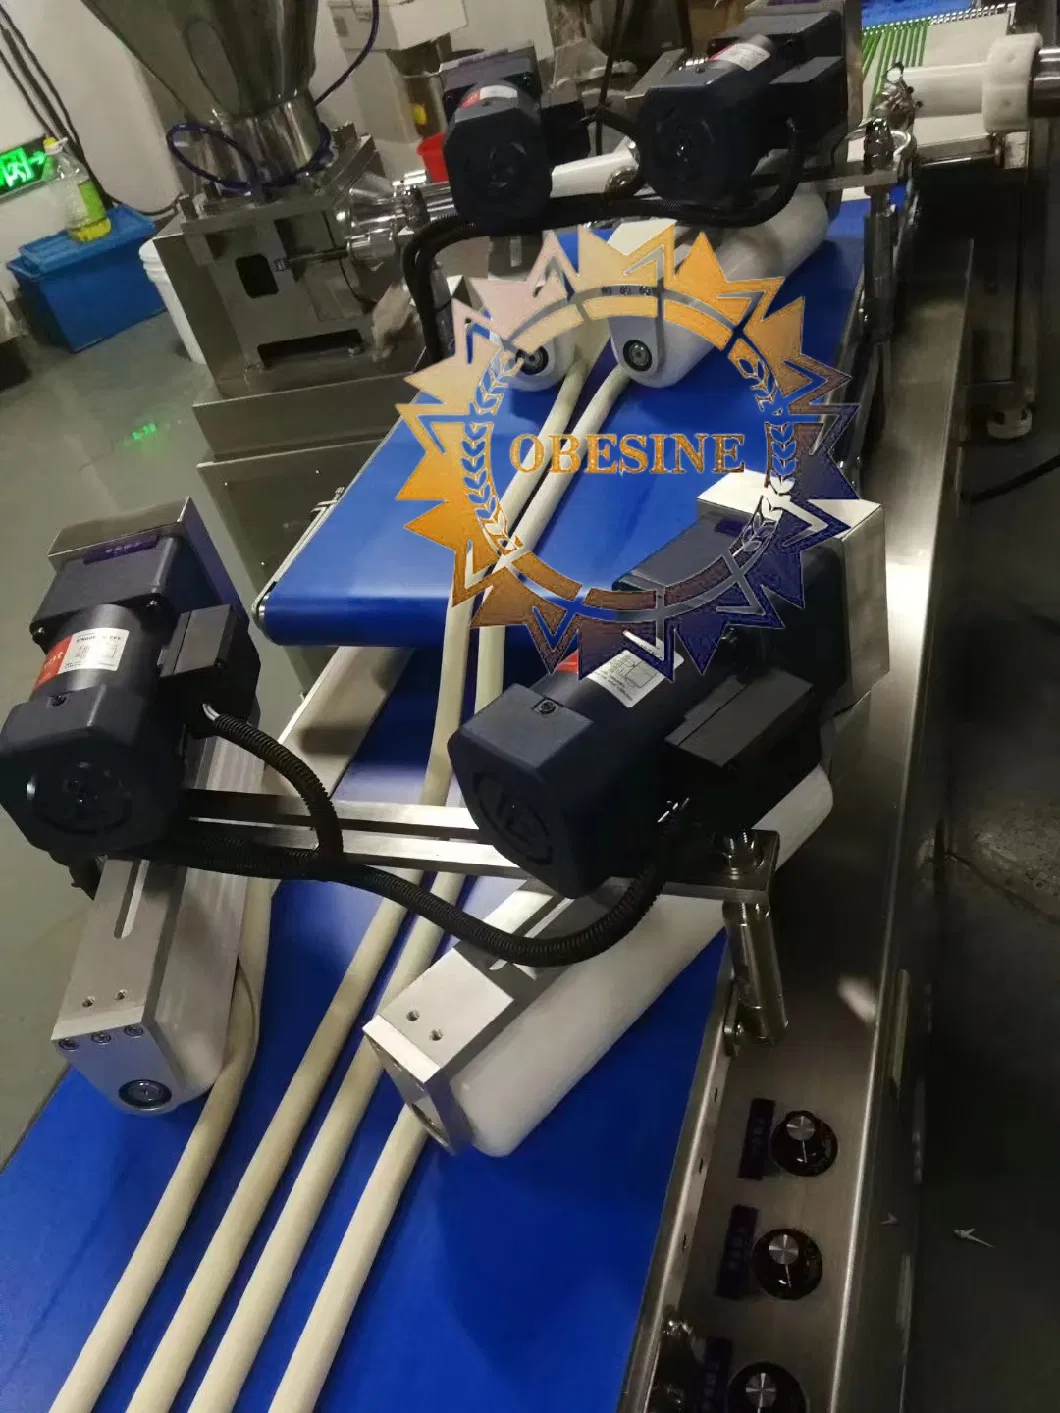 Complete Automatic Pastry Toast Bread Make up Line Filled Croissant Machine